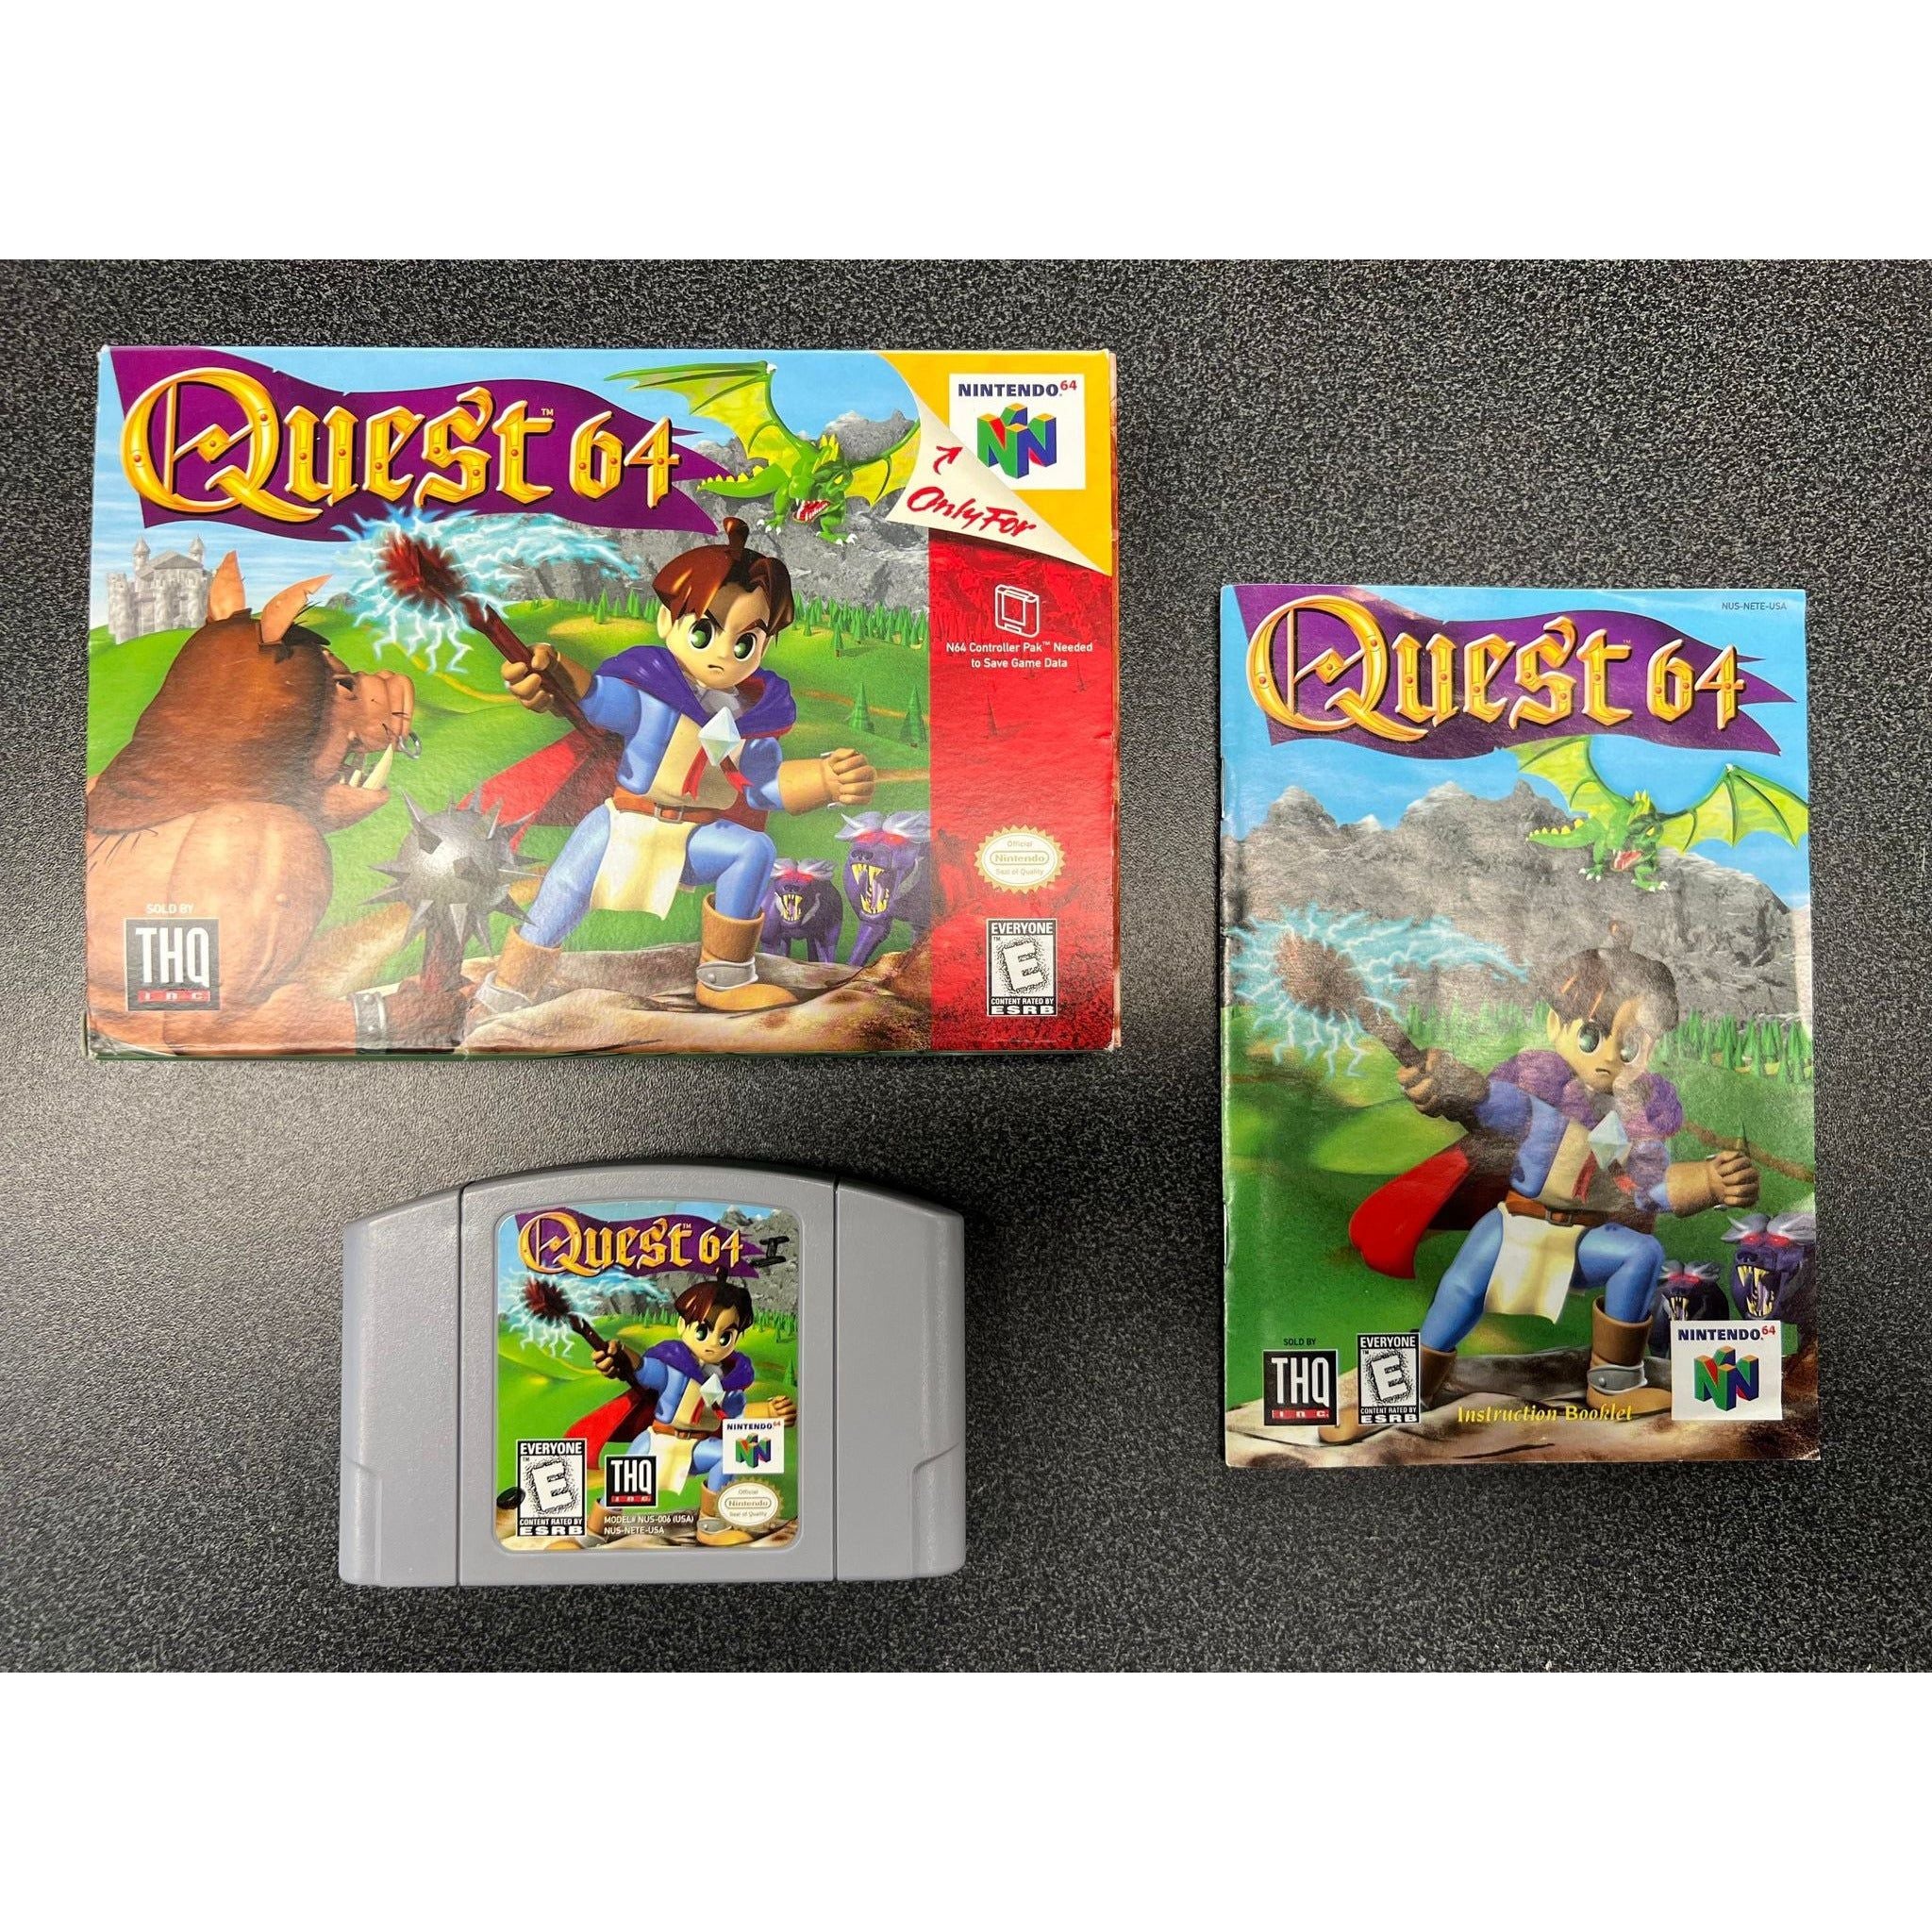 N64 - Quest 64 (Complete in Box)